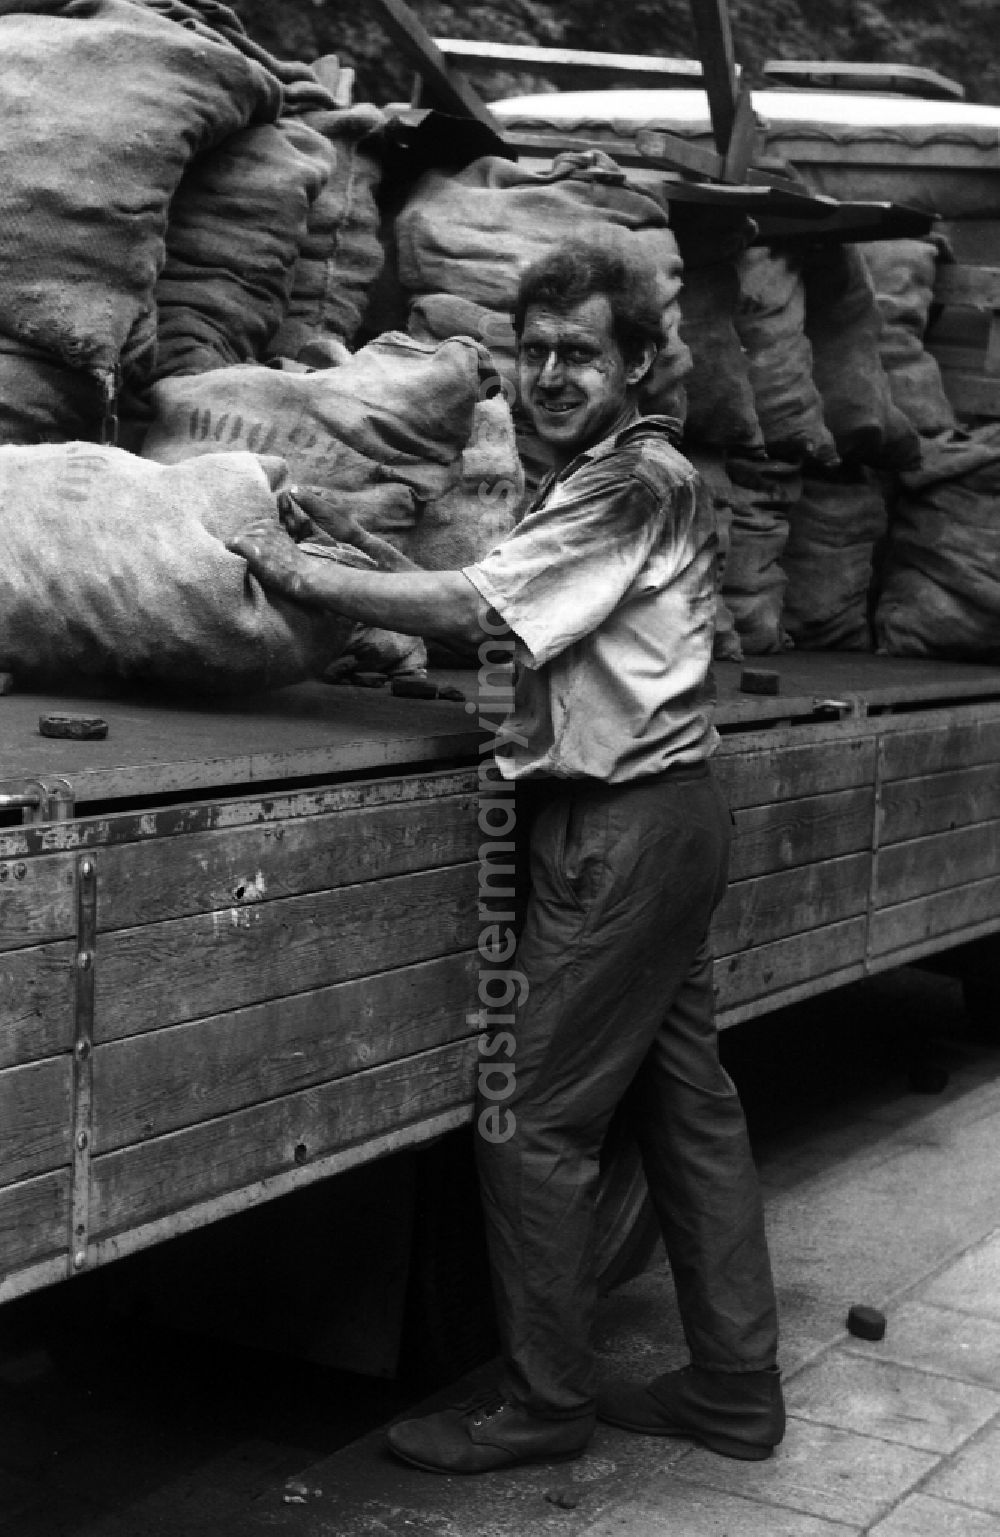 GDR photo archive: Berlin - Worker carries a sack of carbon in the district Mitte in Berlin Eastberlin on the territory of the former GDR, German Democratic Republic